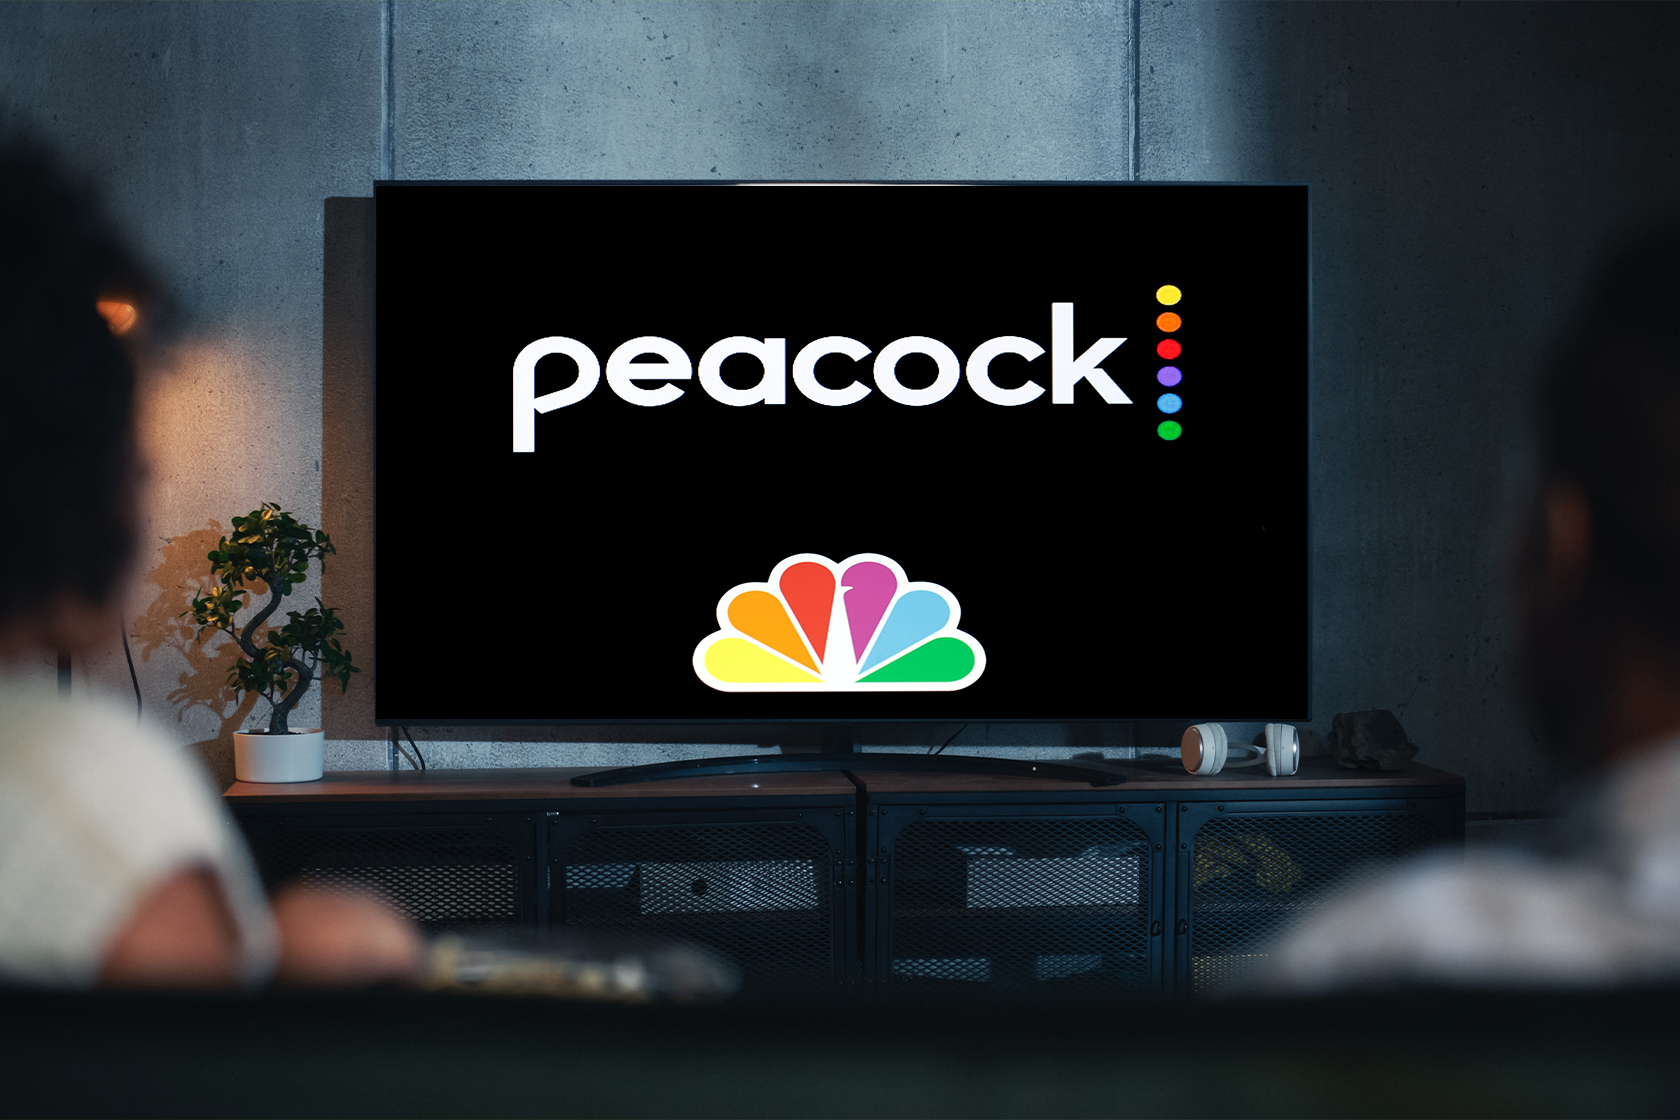 Peacock TV Subscription plans, prices and benefits